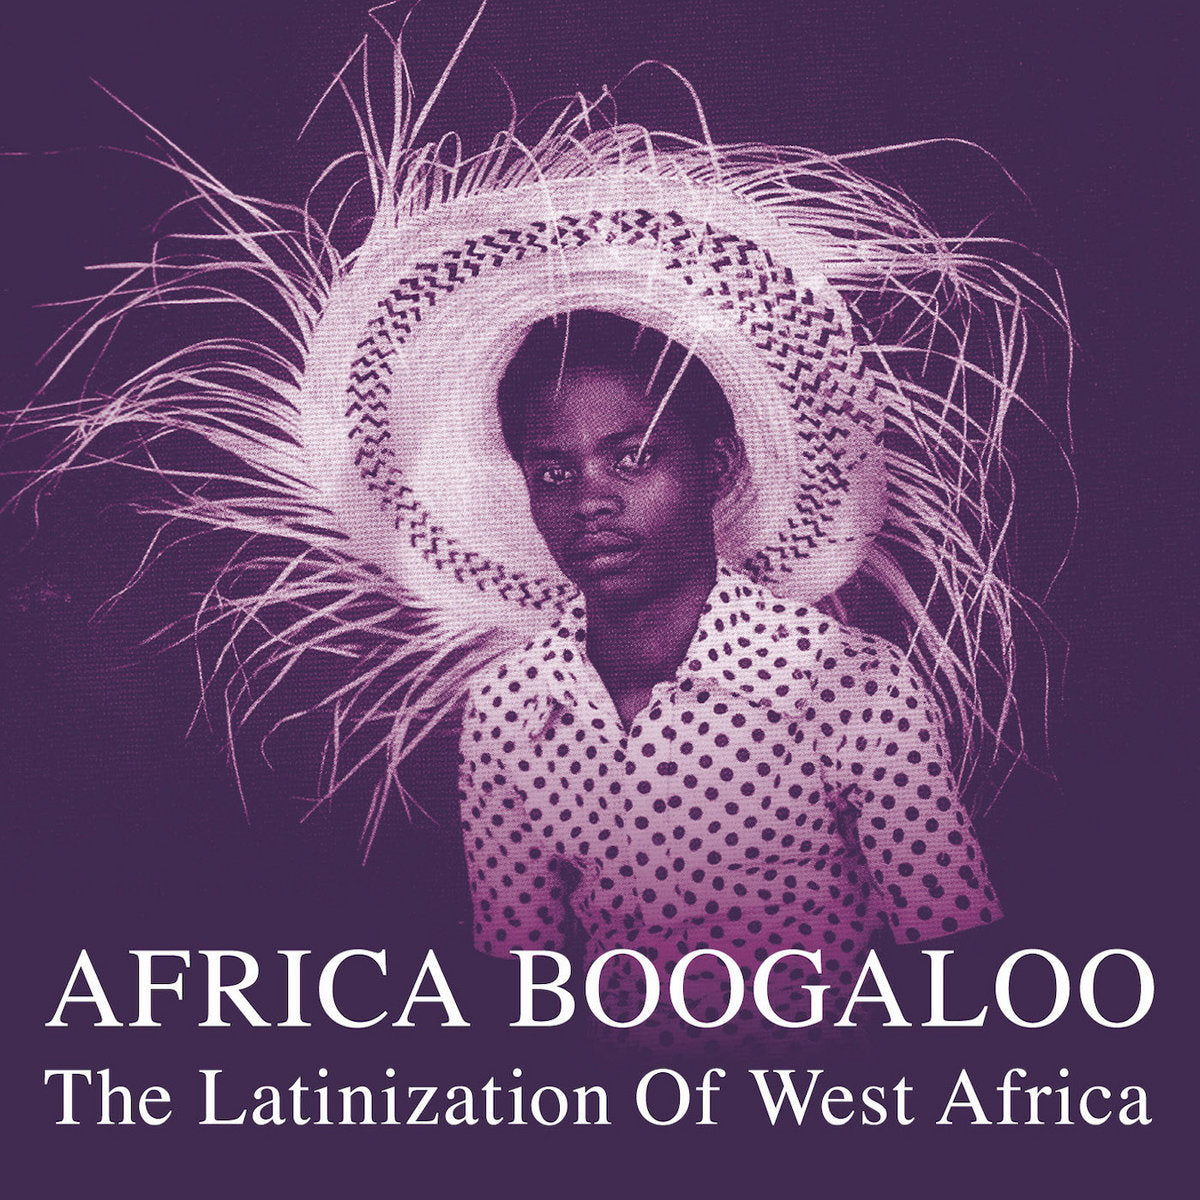 Africa Boogaloo - The Latinization Of West Africa